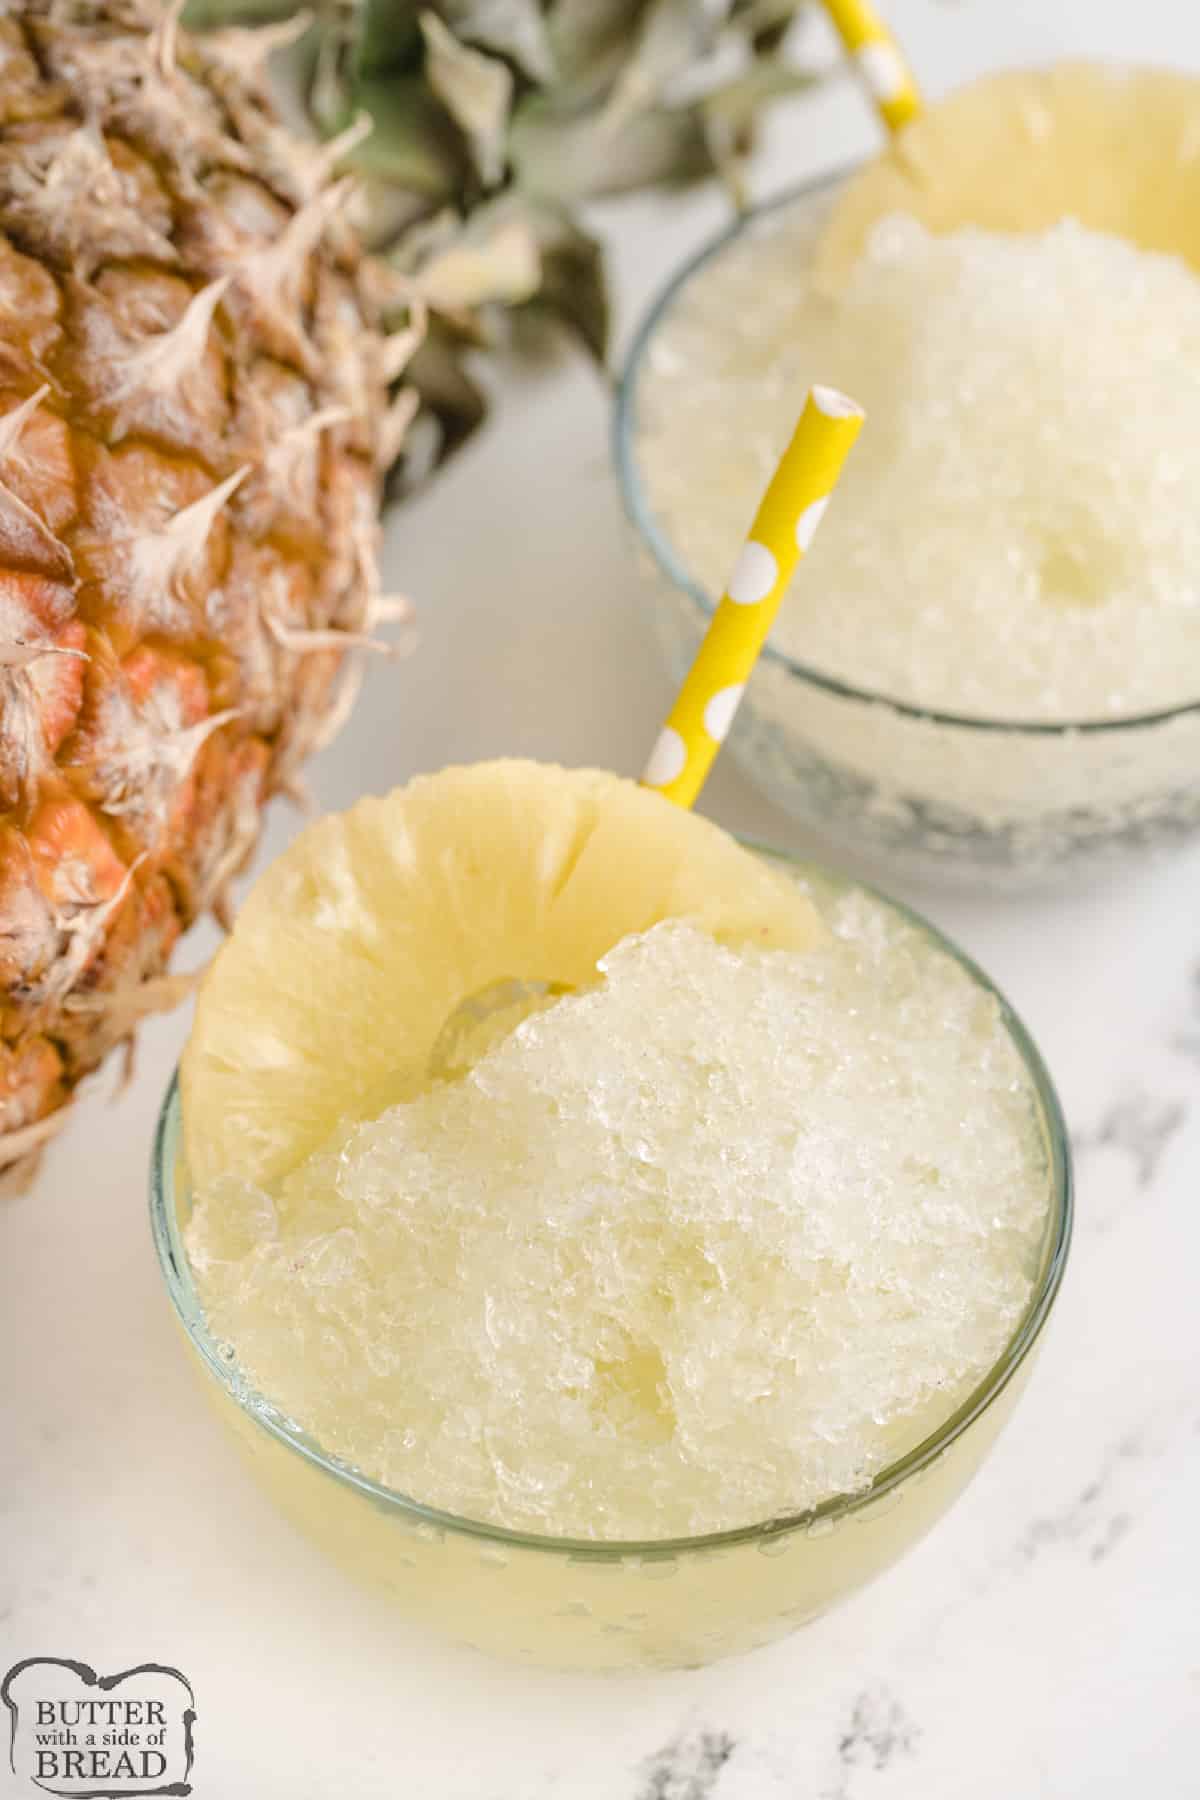 Pineapple syrup recipe for shaved ice